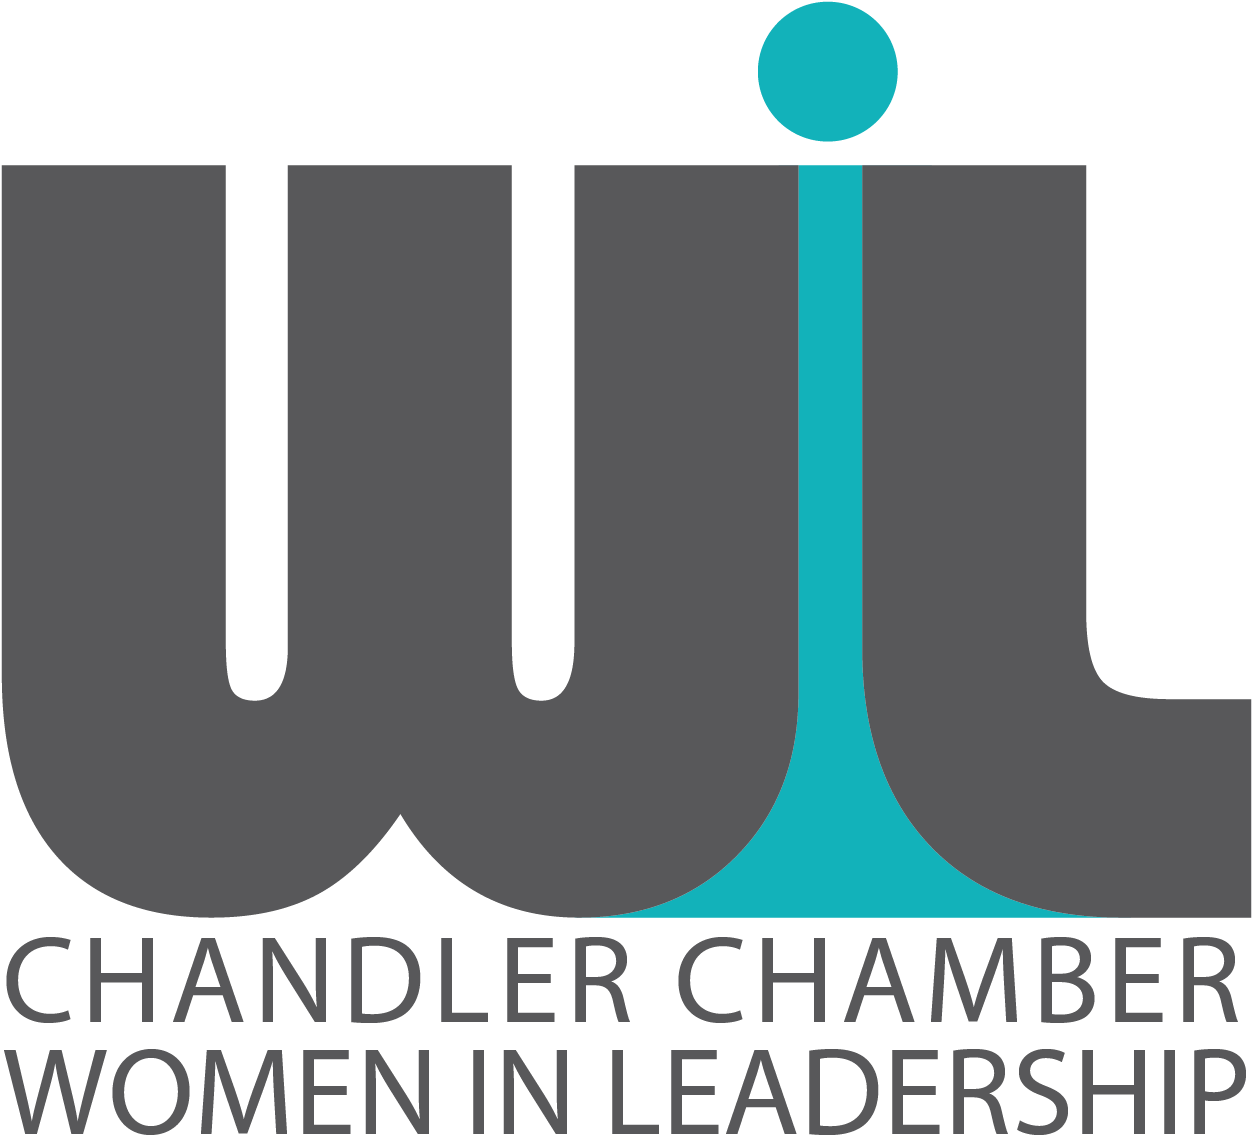 The Mission Of Women In Leadership Is To Empower And - Chandler Chamber Of Commerce (1500x1500)